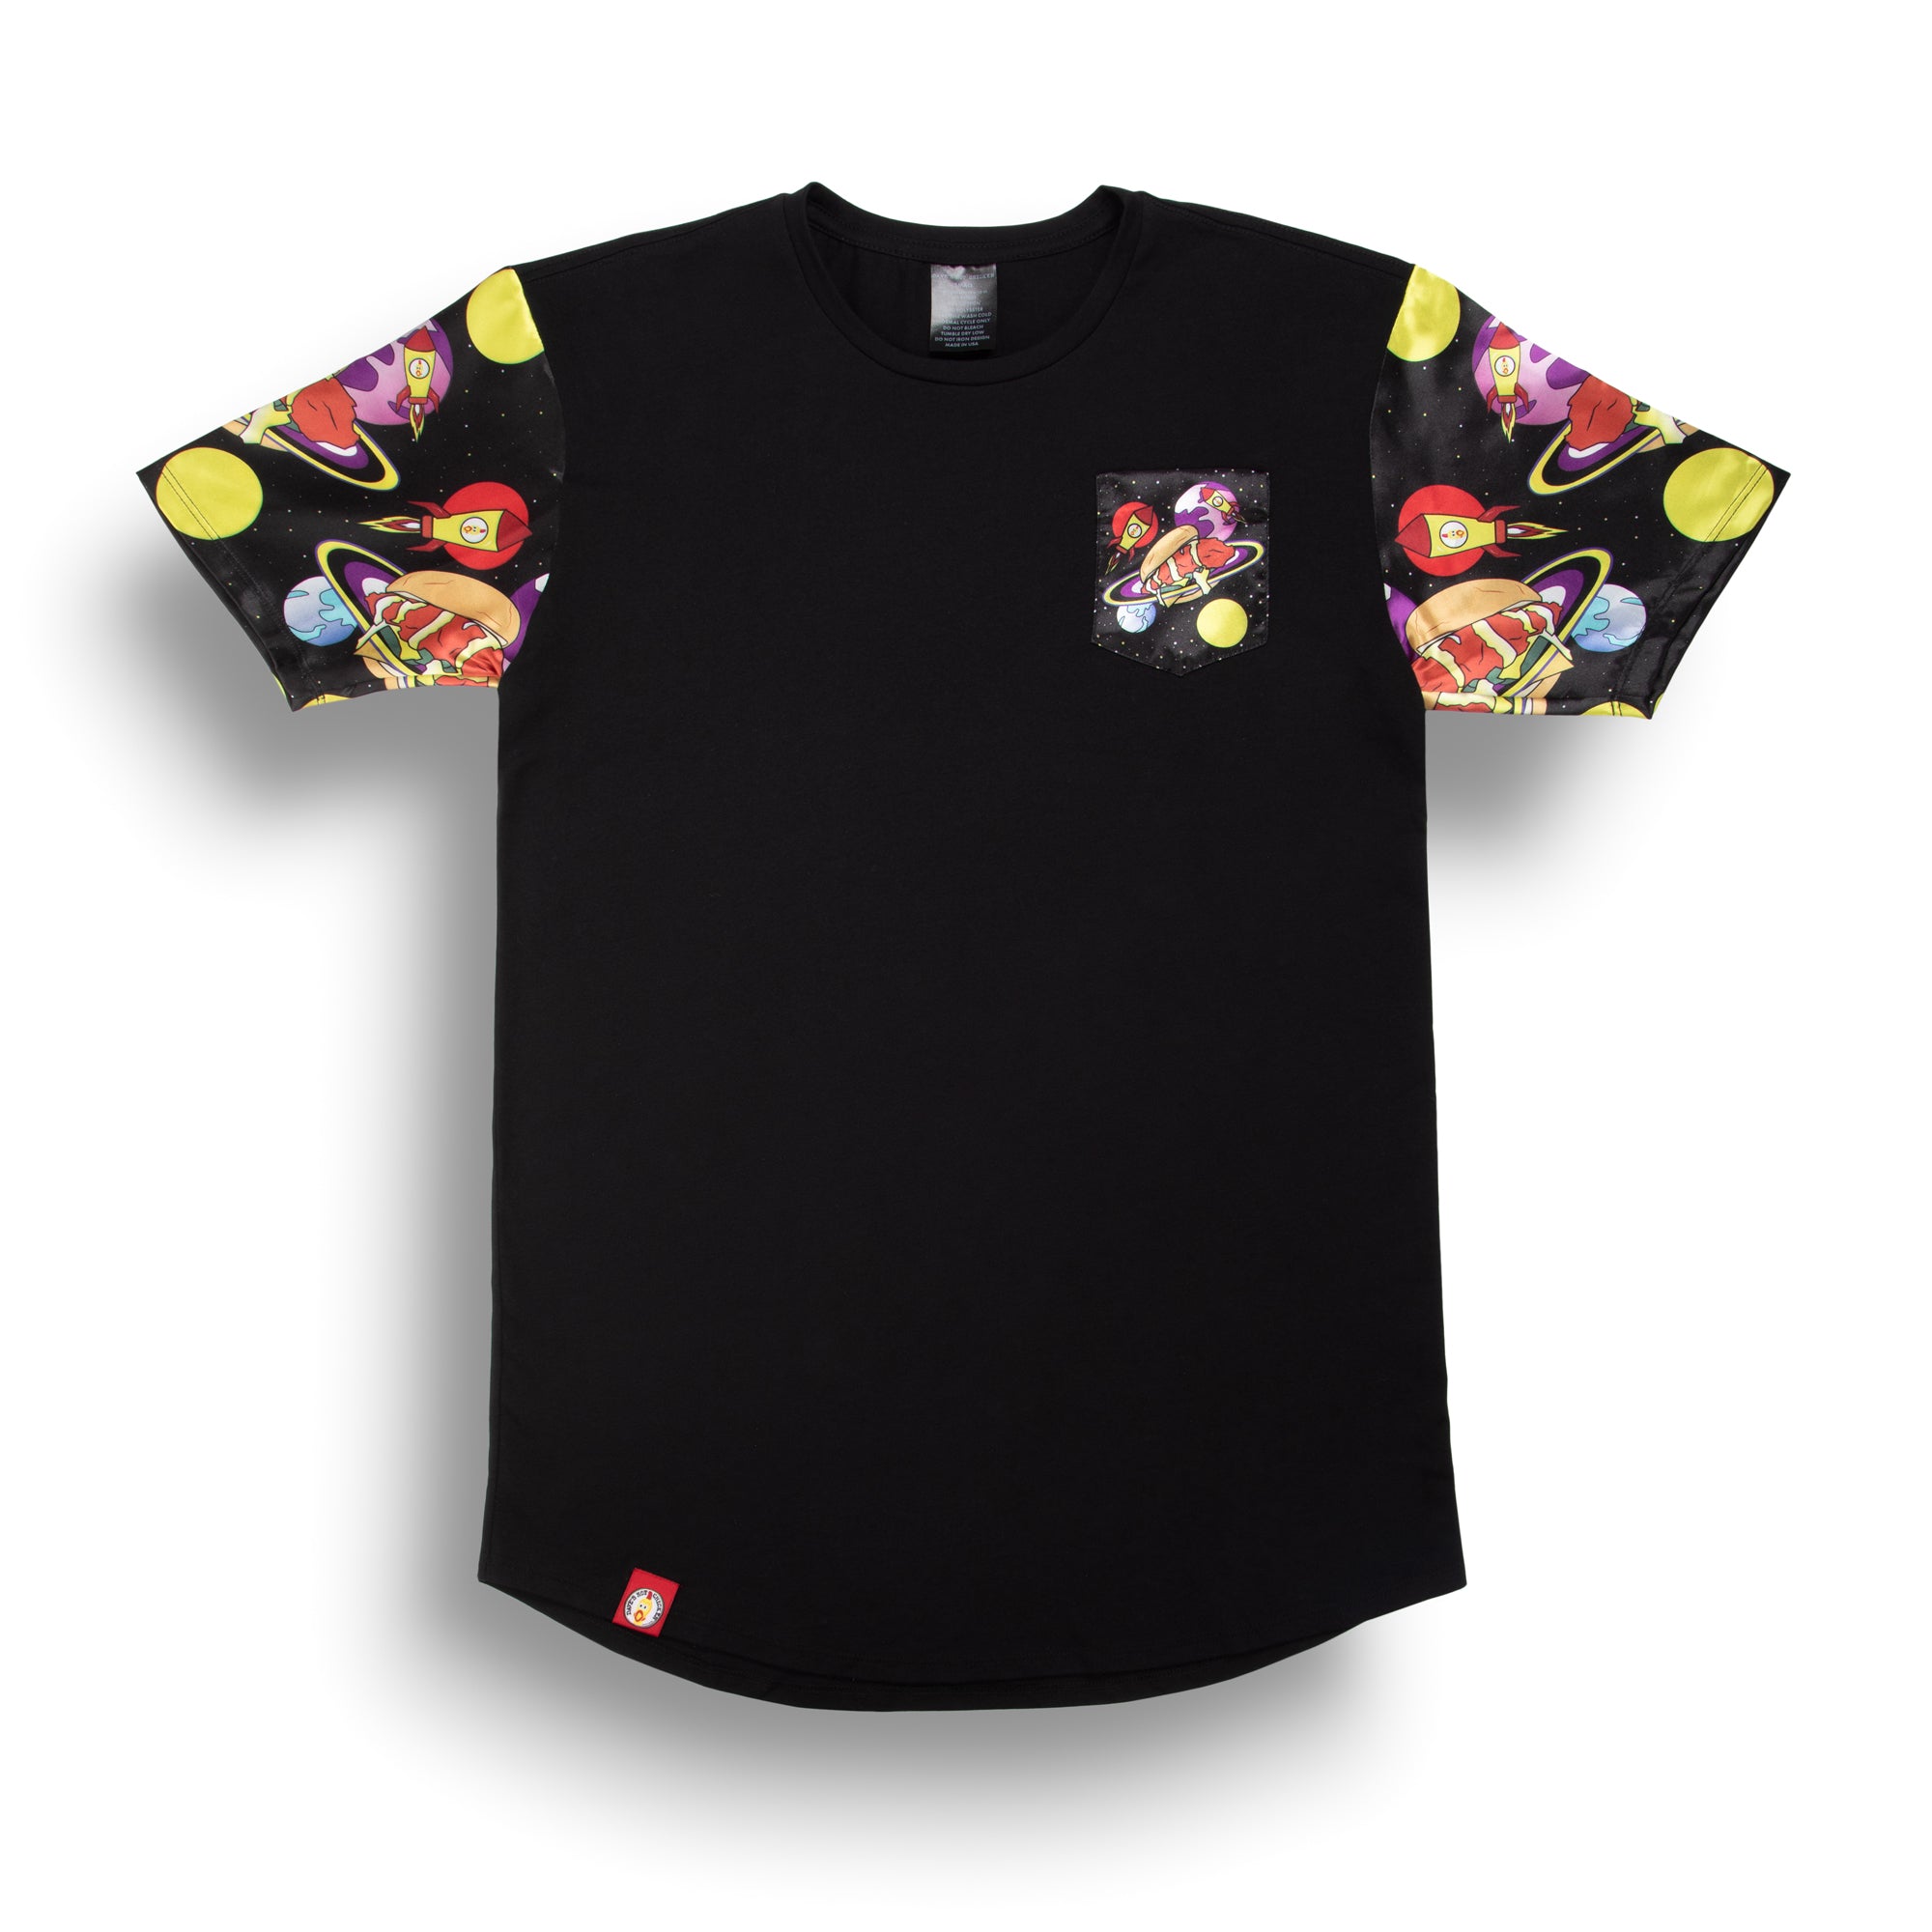 plain black easy-fit tee shirt with outer space theme